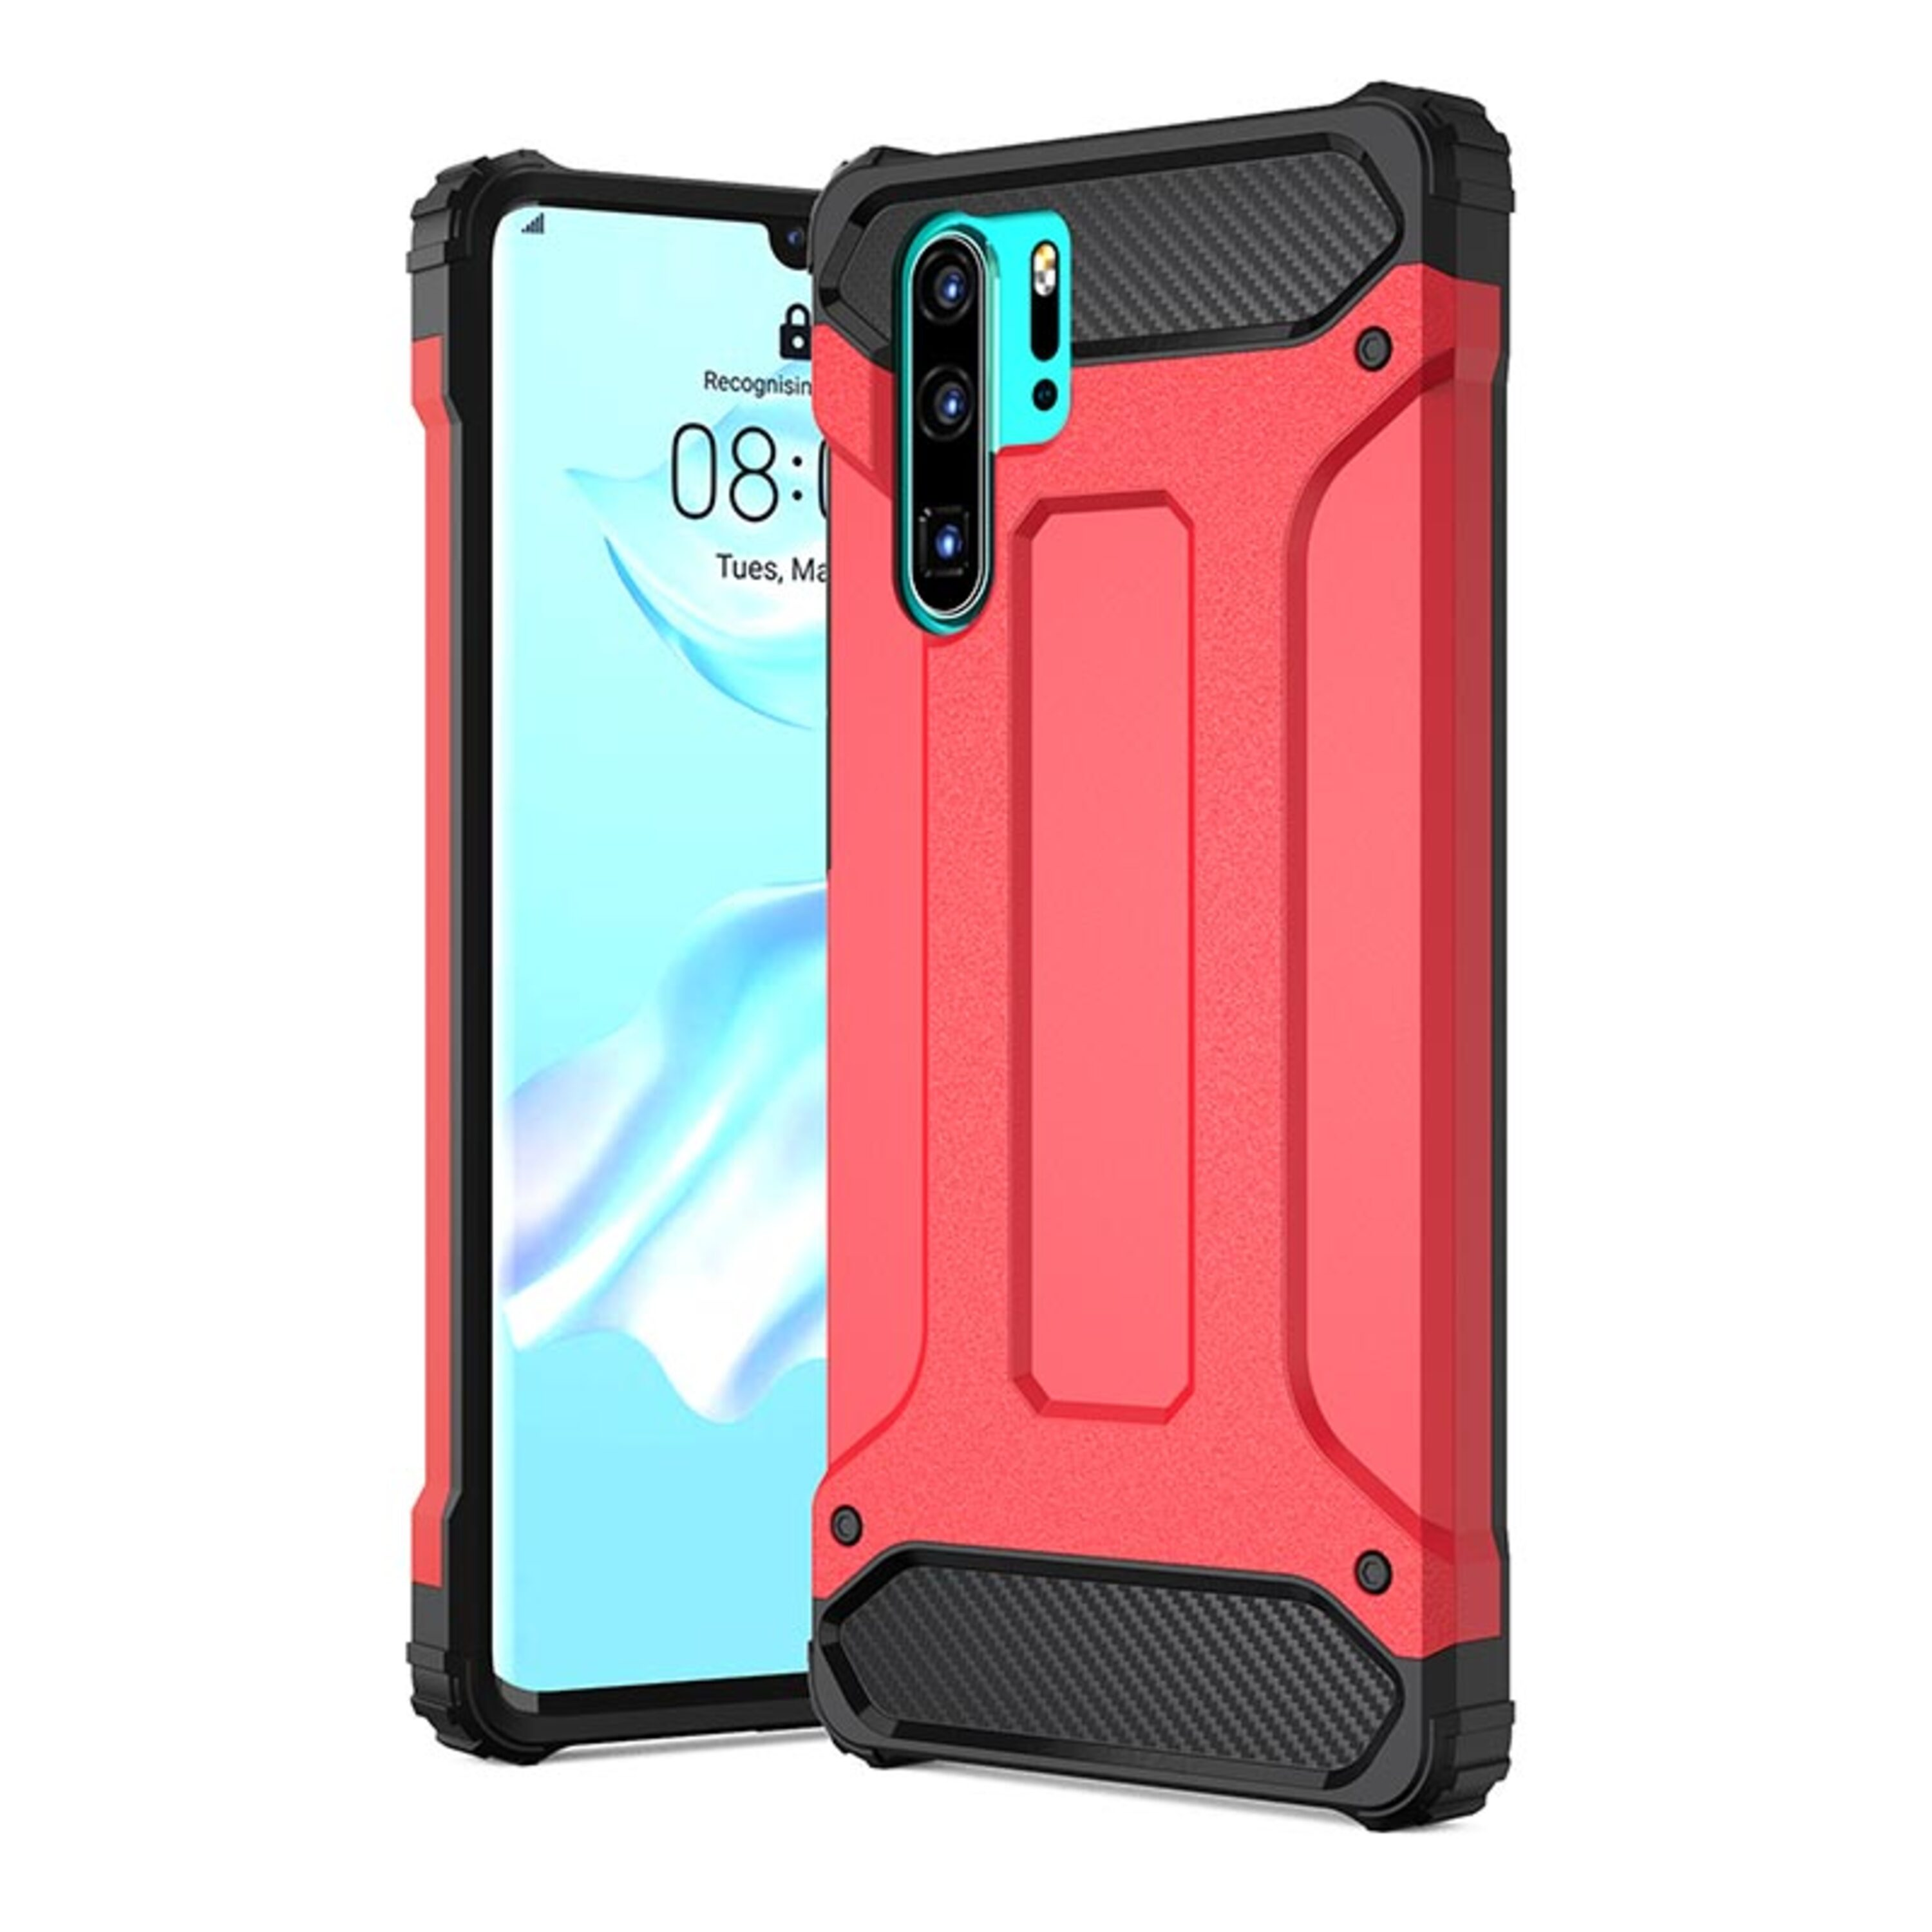 HBASICS Armor Handyhülle für Huawei, Rot Pro, Pro, P30 P30 Huawei Backcover